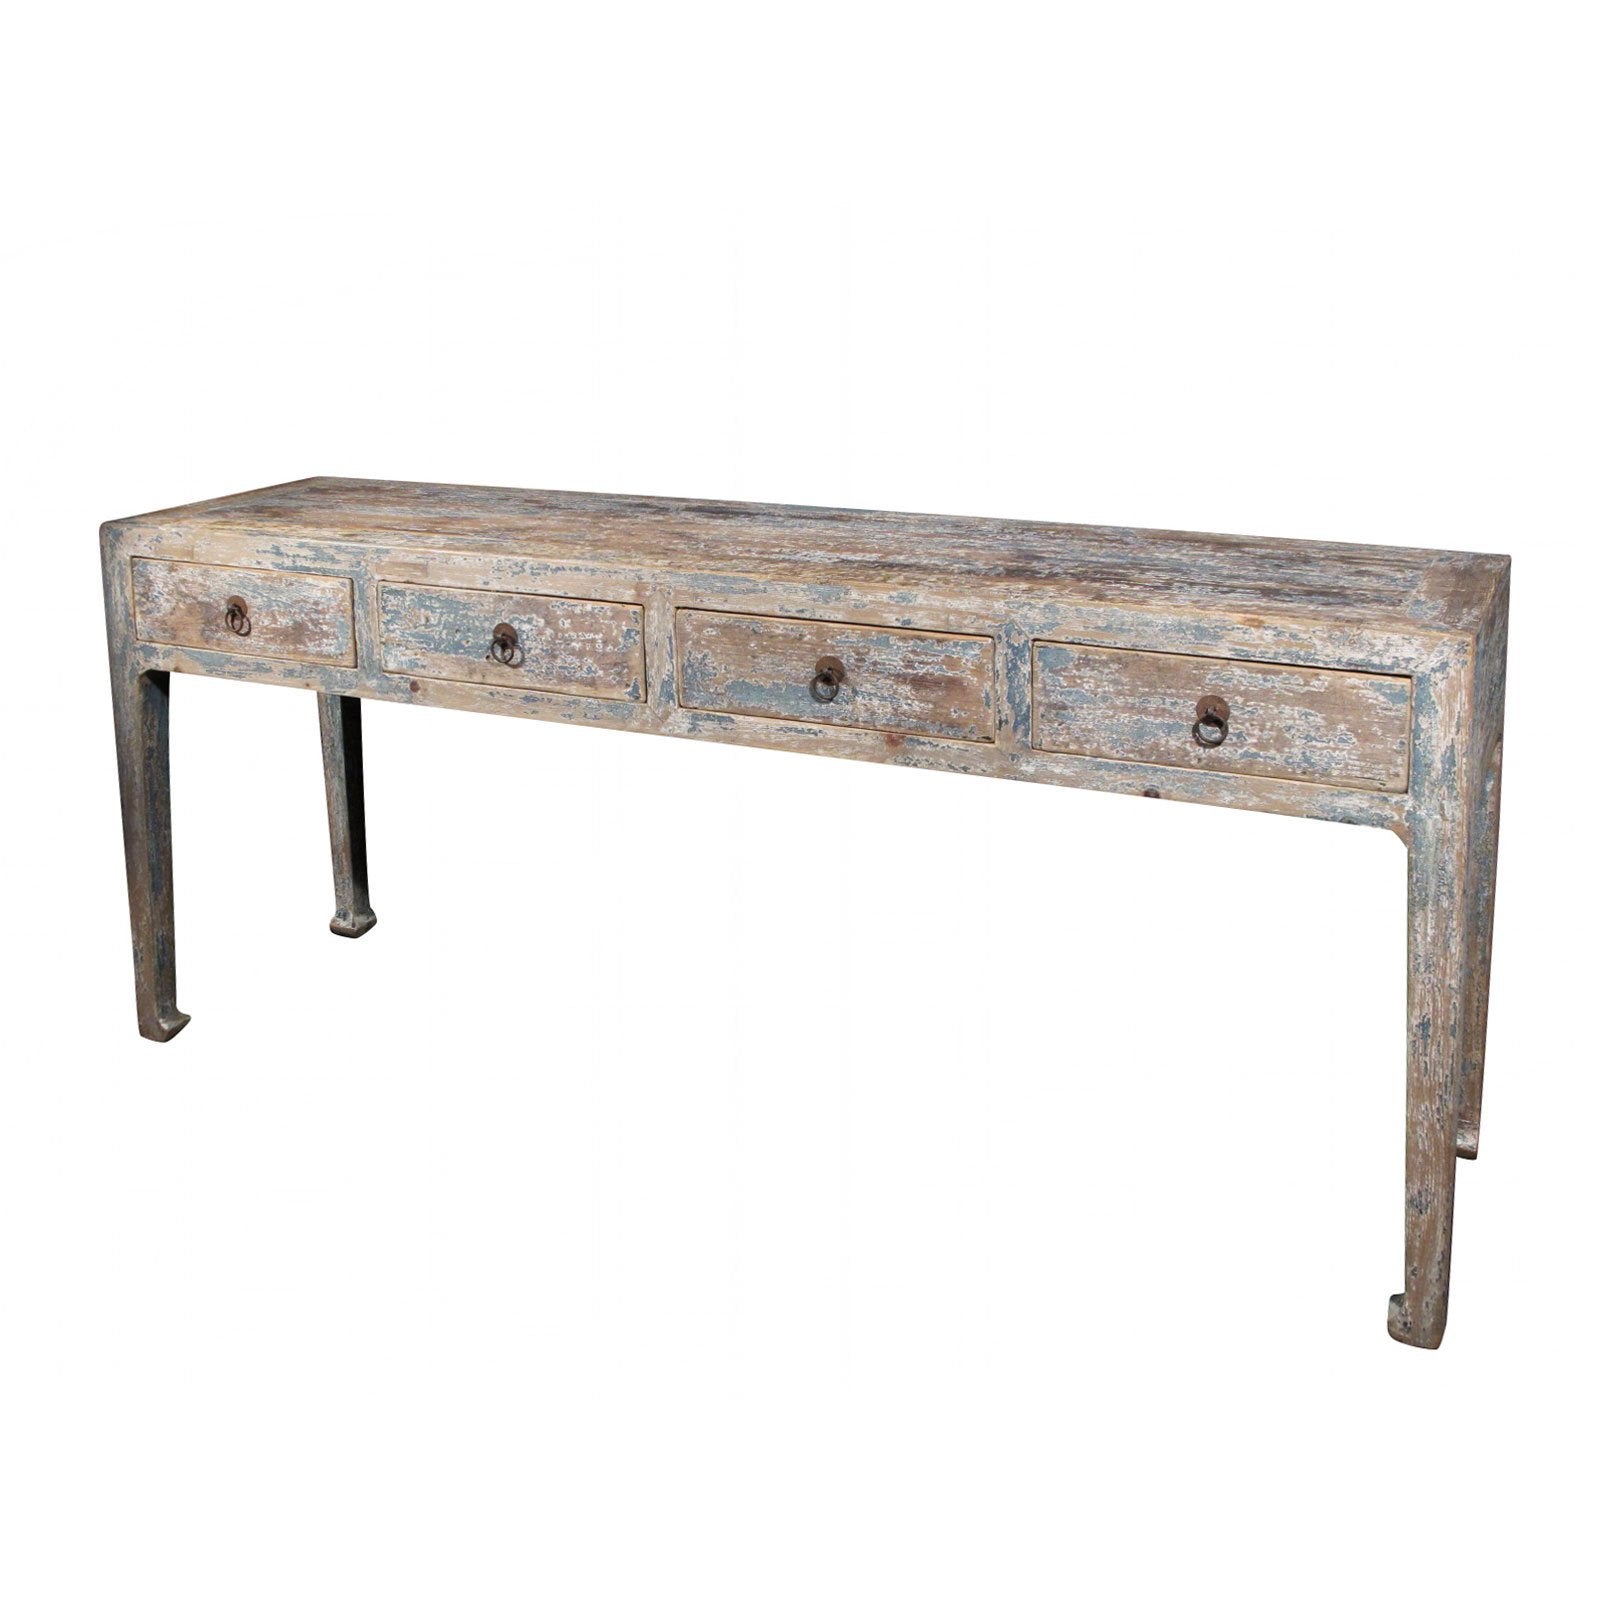 4 Drawer Altar Table Made From Old Painted Pine | Indigo Oriental Antiques